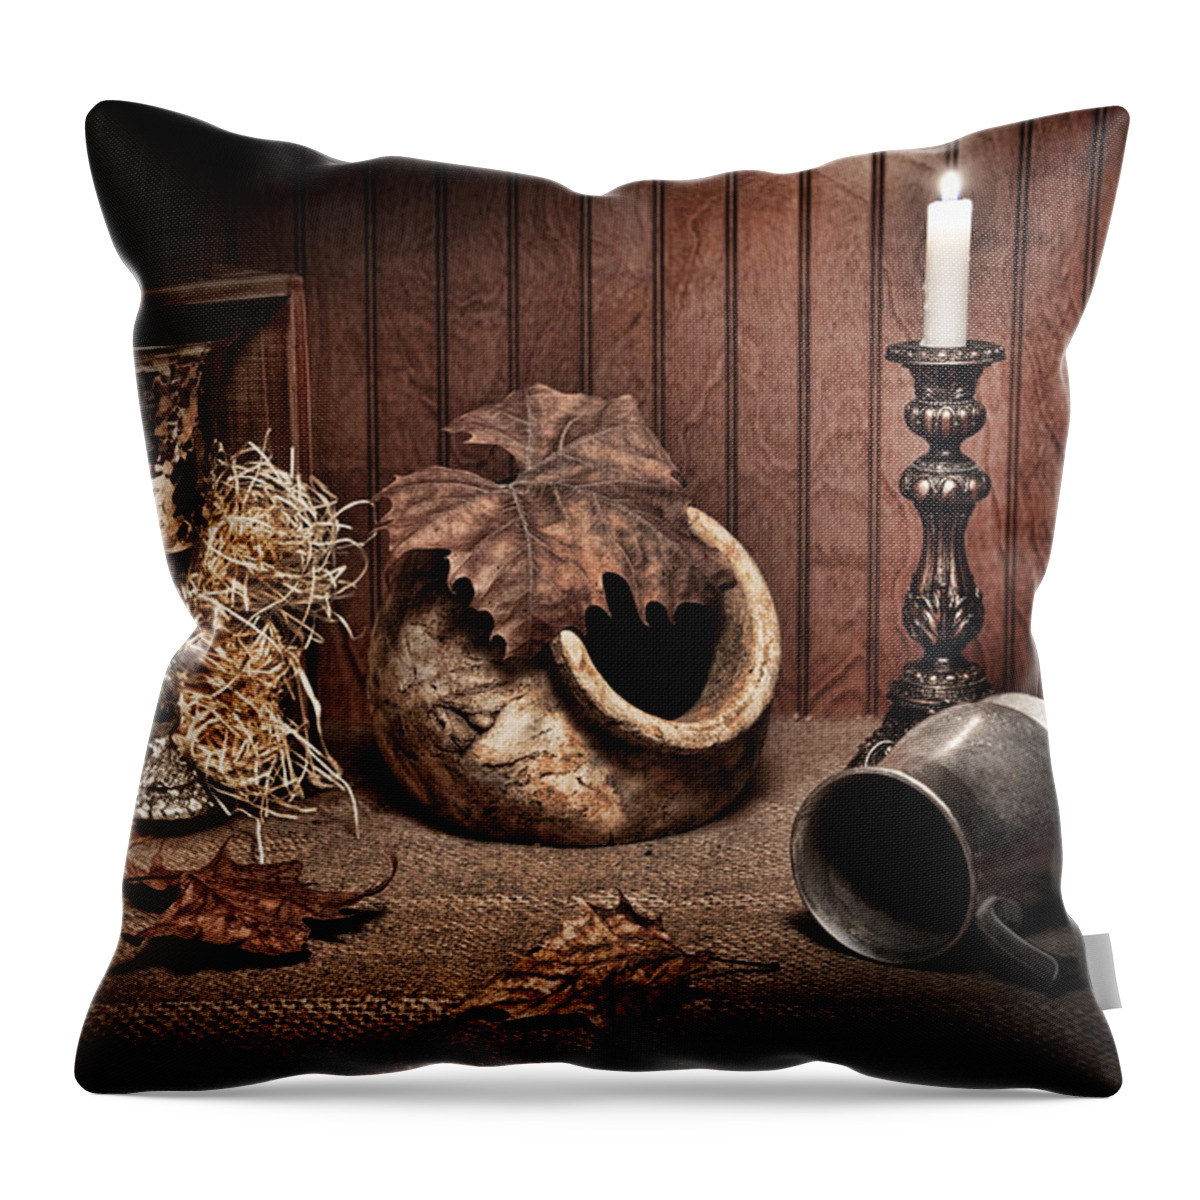 Leaves Throw Pillow featuring the photograph Leaves and Vessels by Candlelight by Tom Mc Nemar